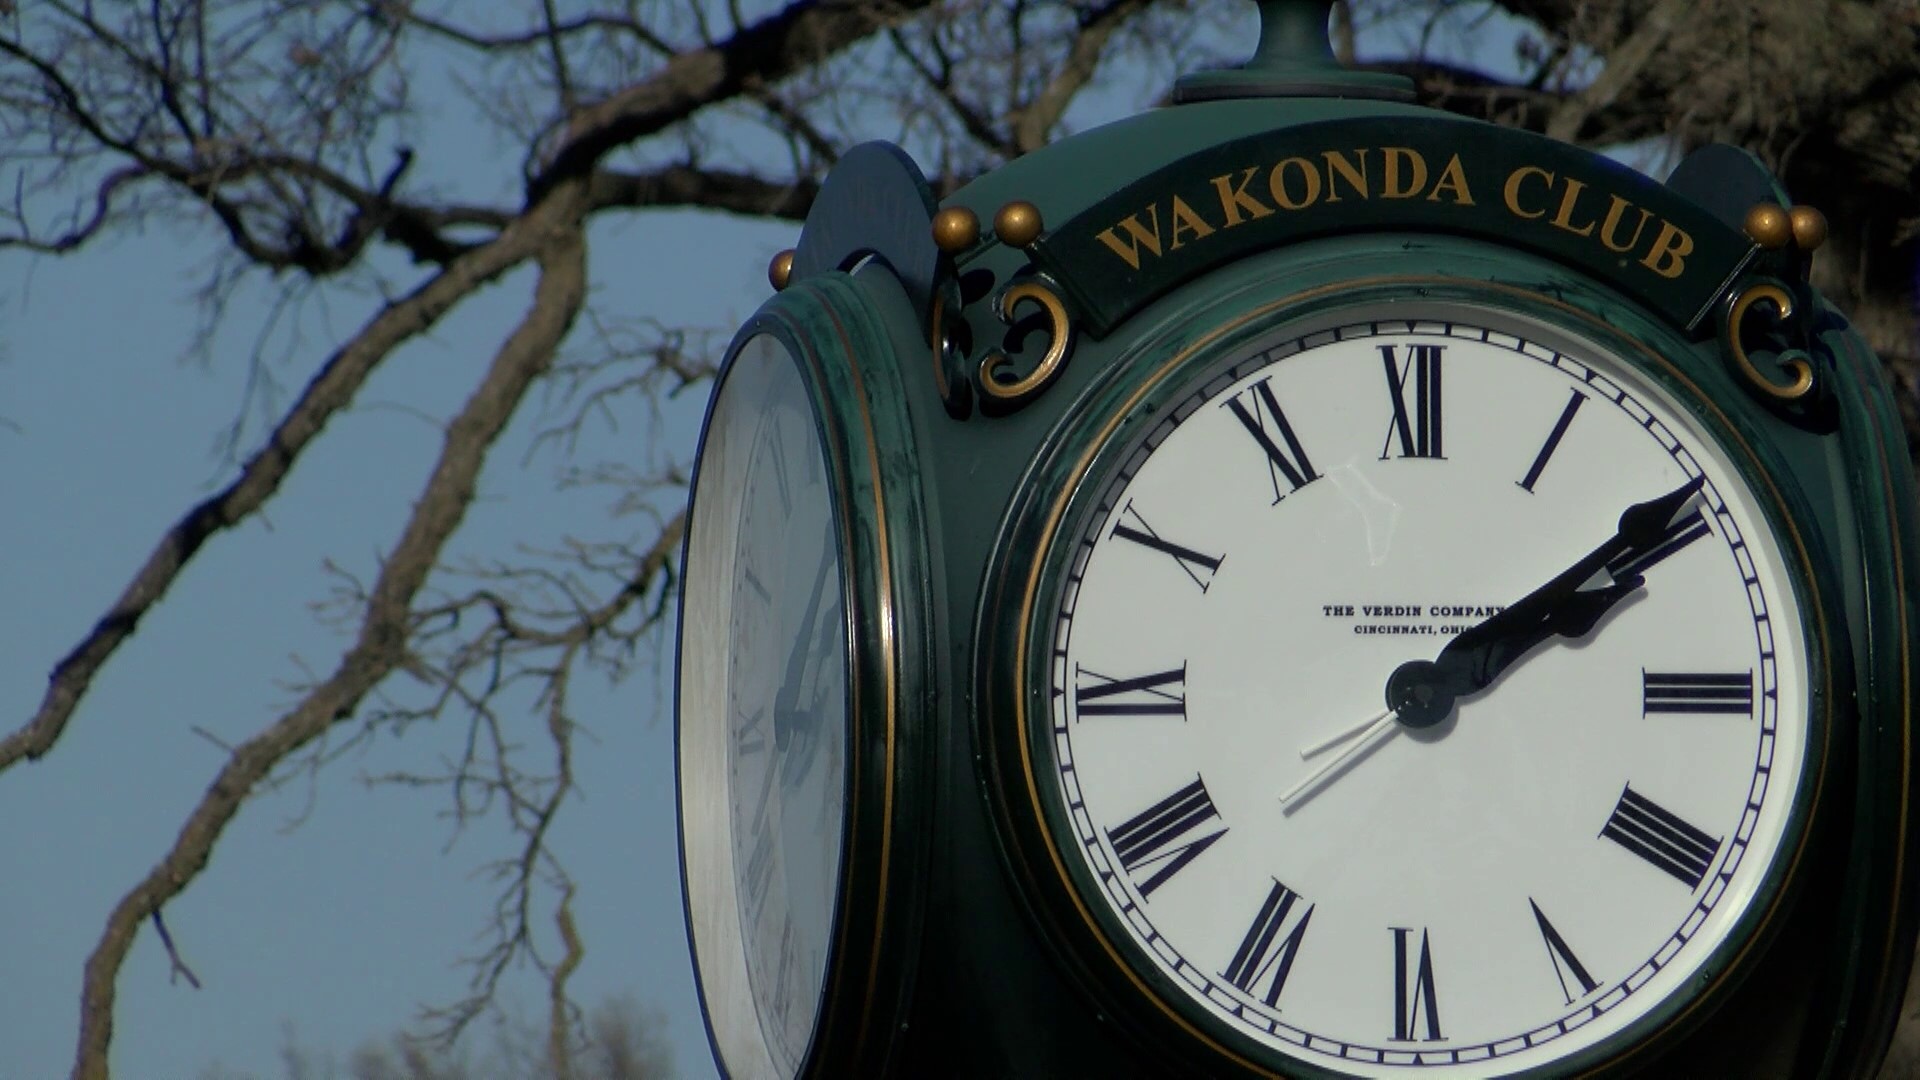 Wakonda Club closed down after the annual Principal Charity Classic in June to renovate their golf course. Here's when they'll reopen in 2024.